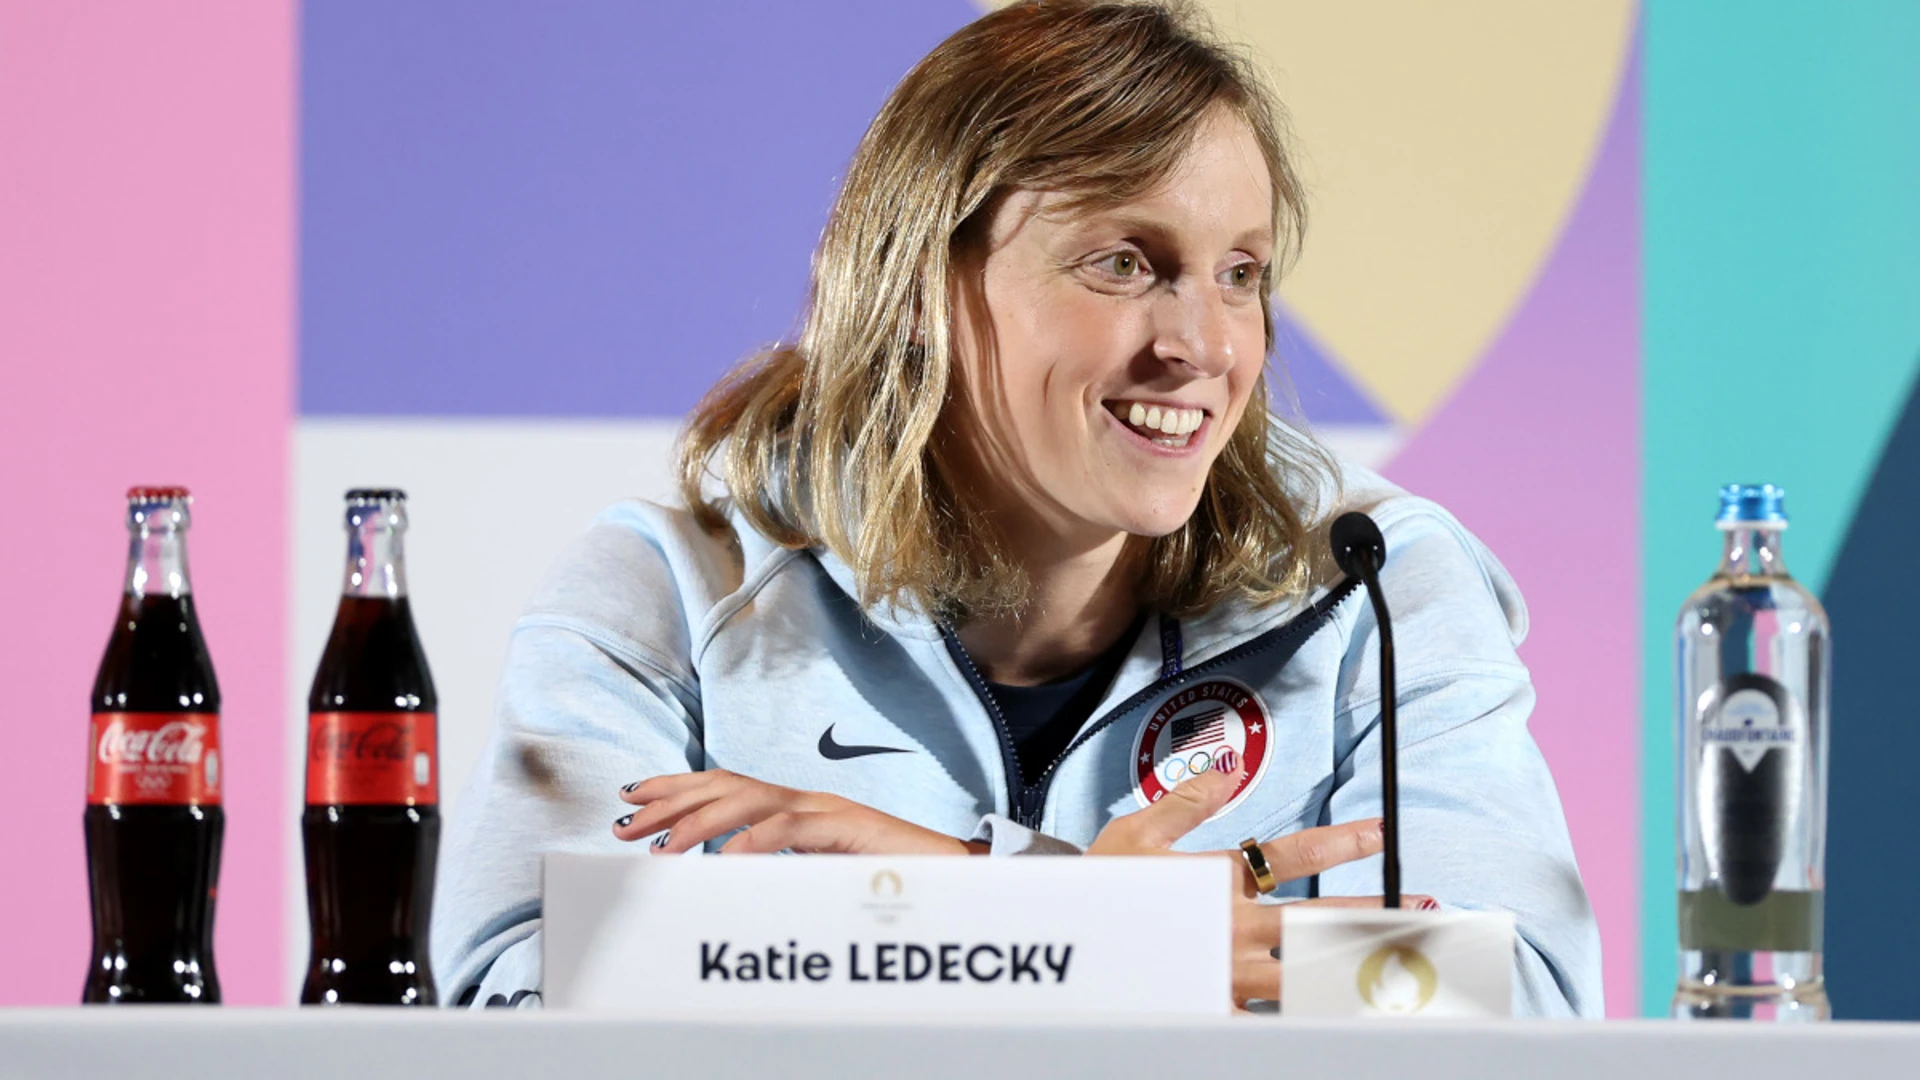 Ledecky hopes for clean Games amid China doping row